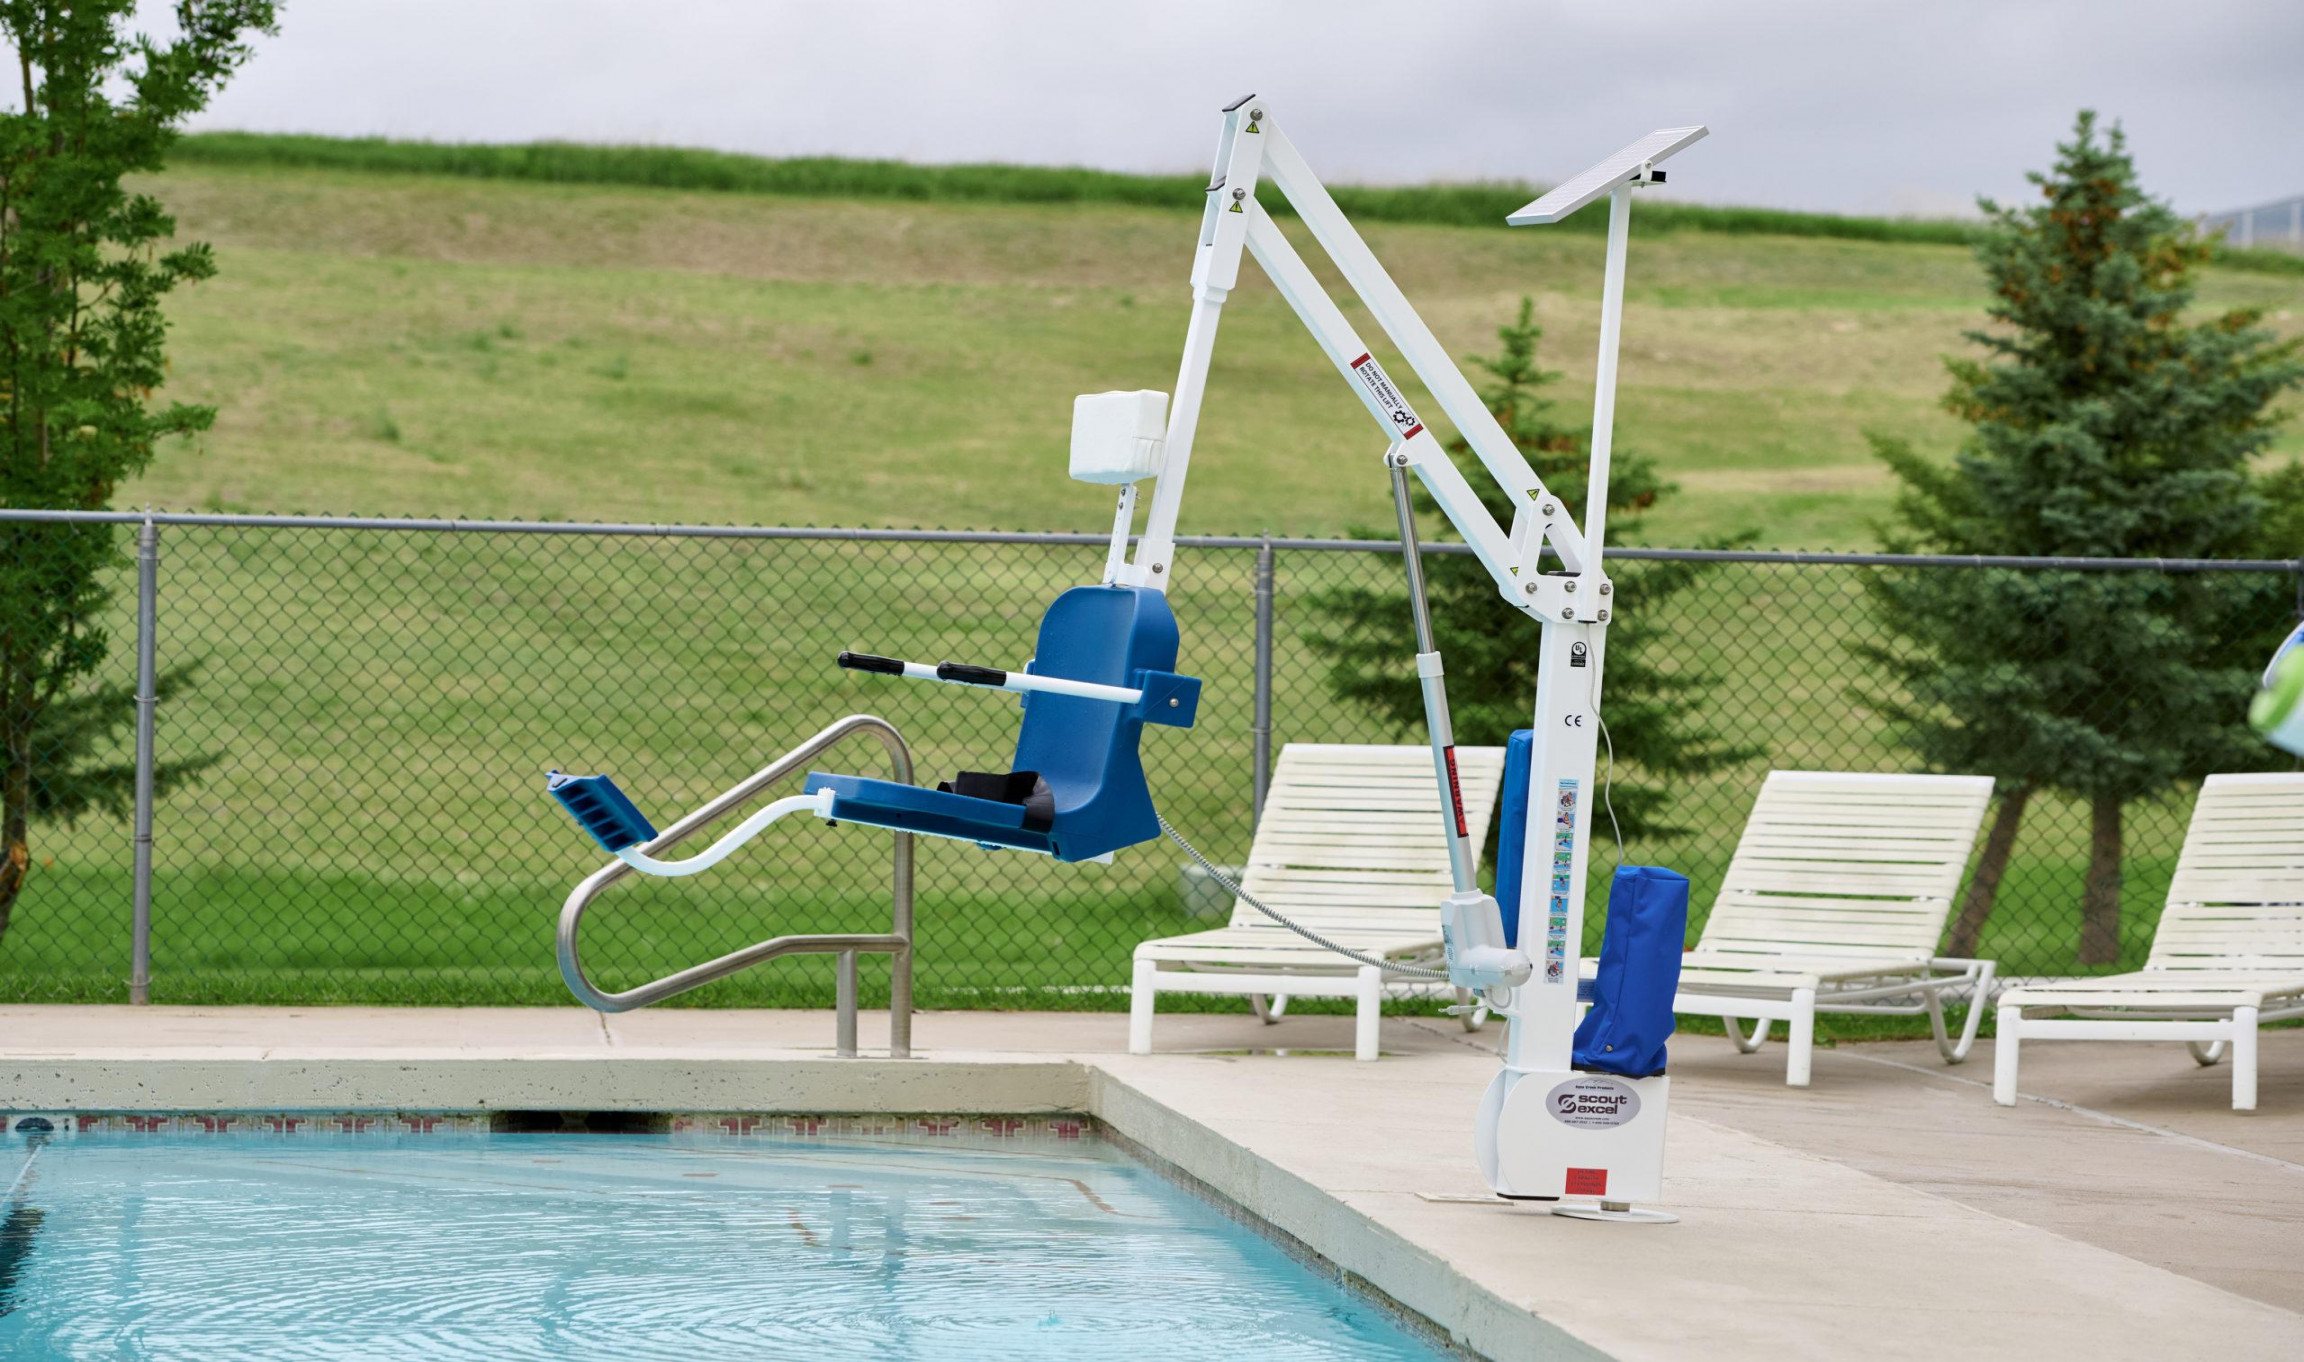 Residential Pool Lifts offered by Amramp in the US